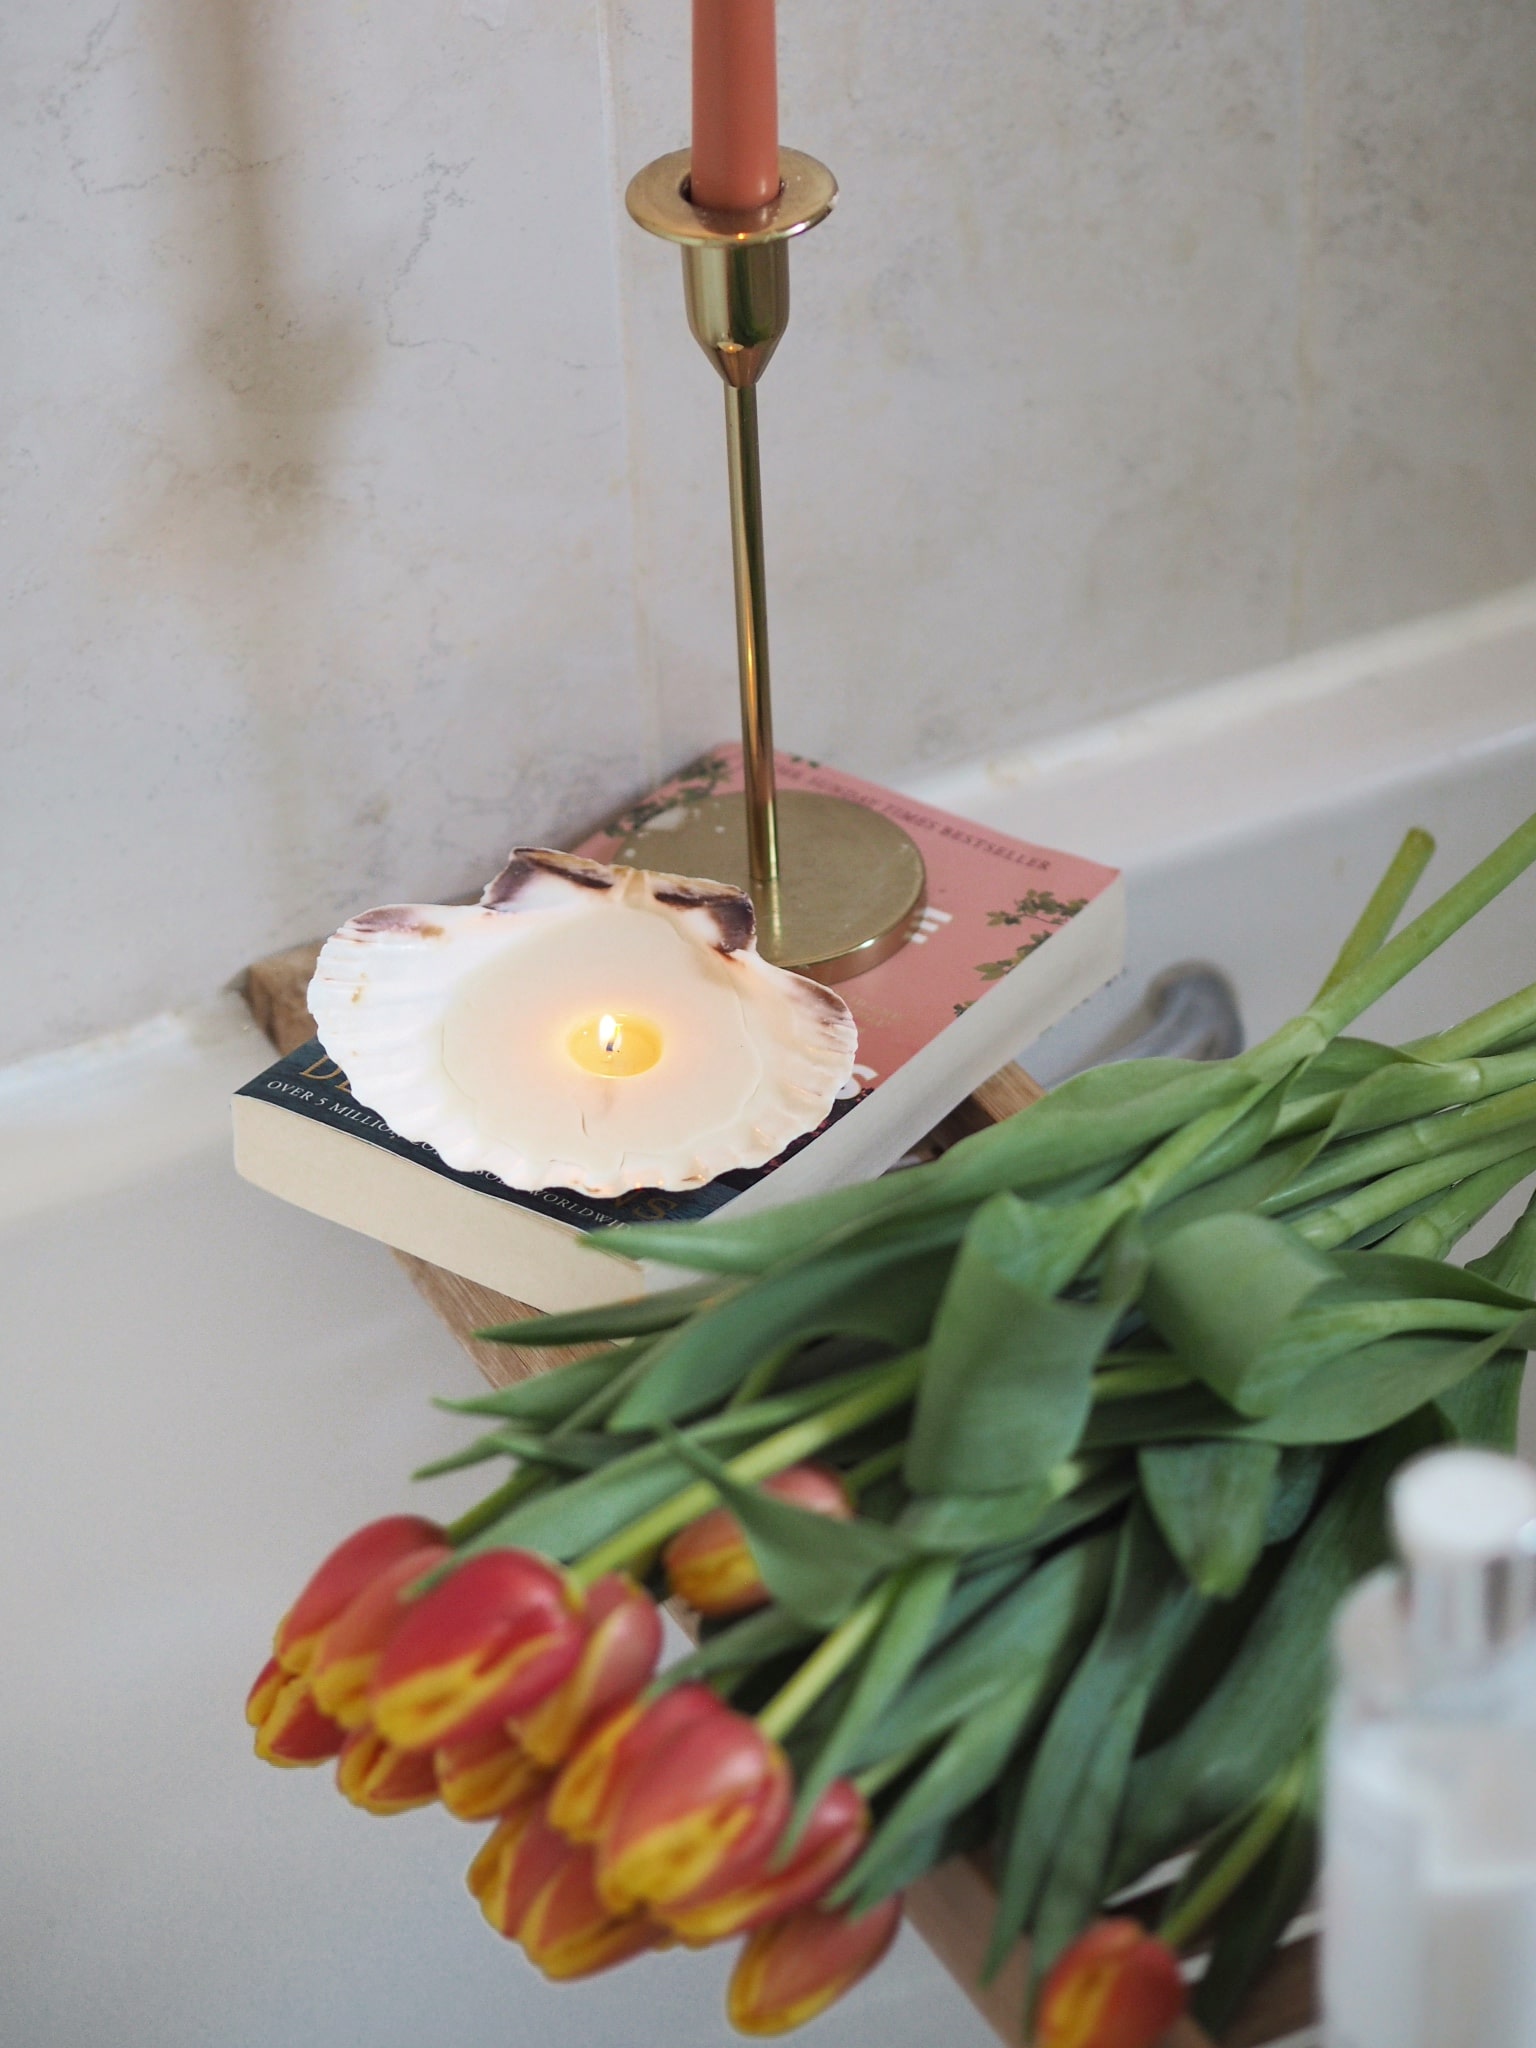 How to make your own DIY shell using wax and tea lights. Simple crafting project to create a stylish, budget candle for your home